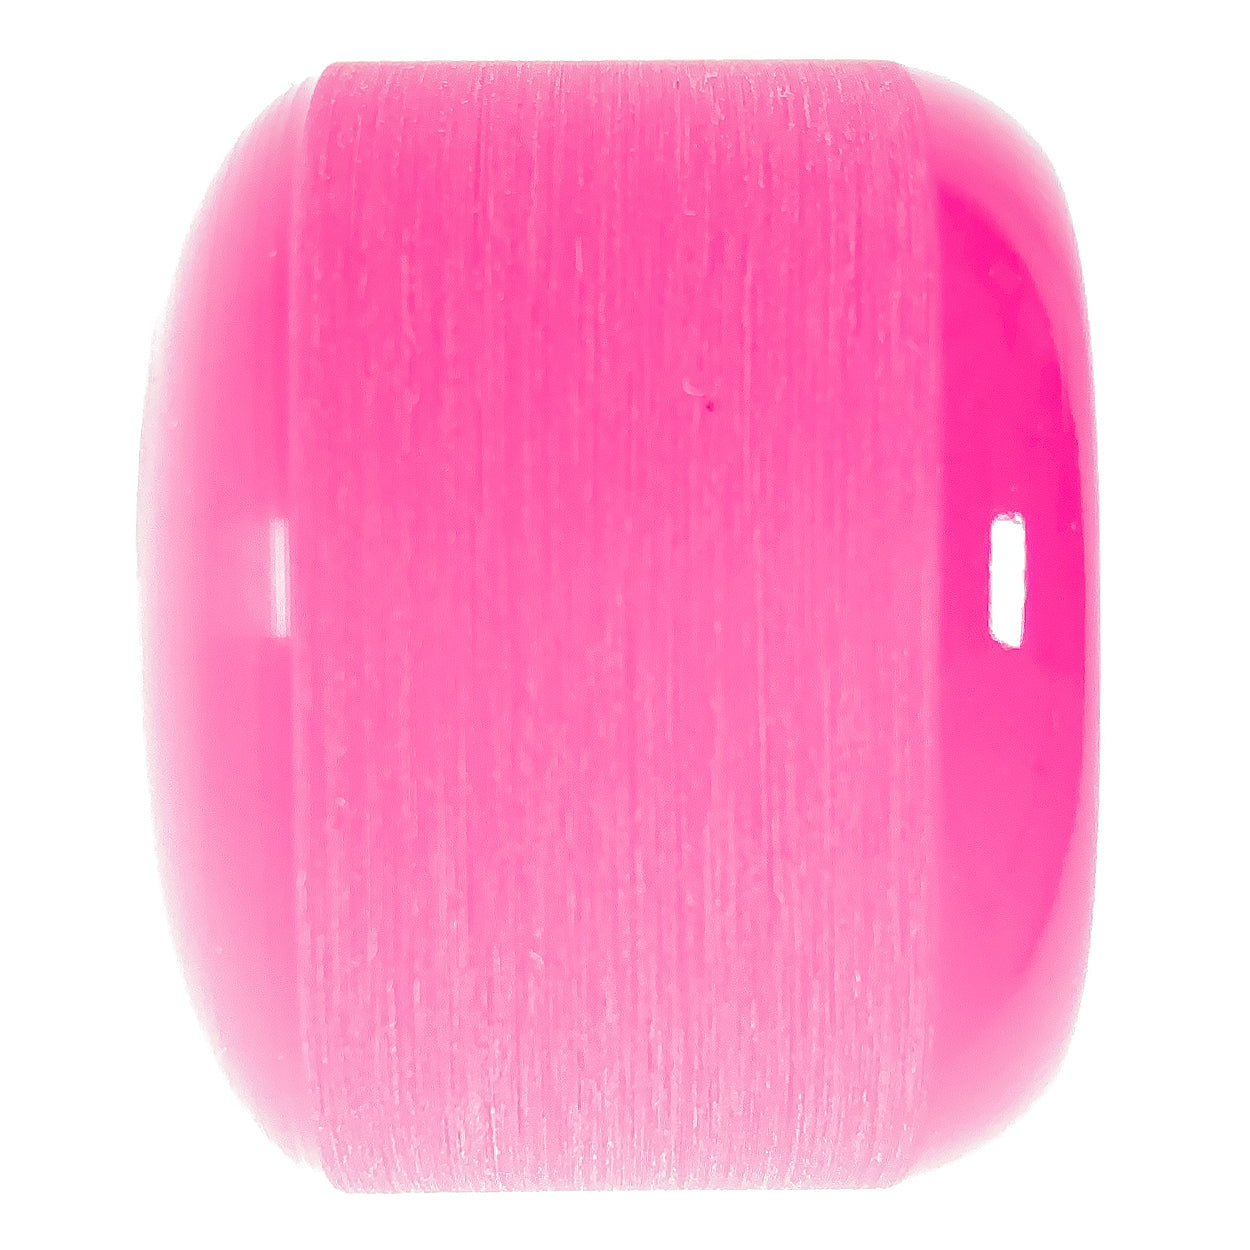 Slime Balls - 60mm - 95a Scudwads Vomits Wheels - Neon Pink - Prime Delux Store